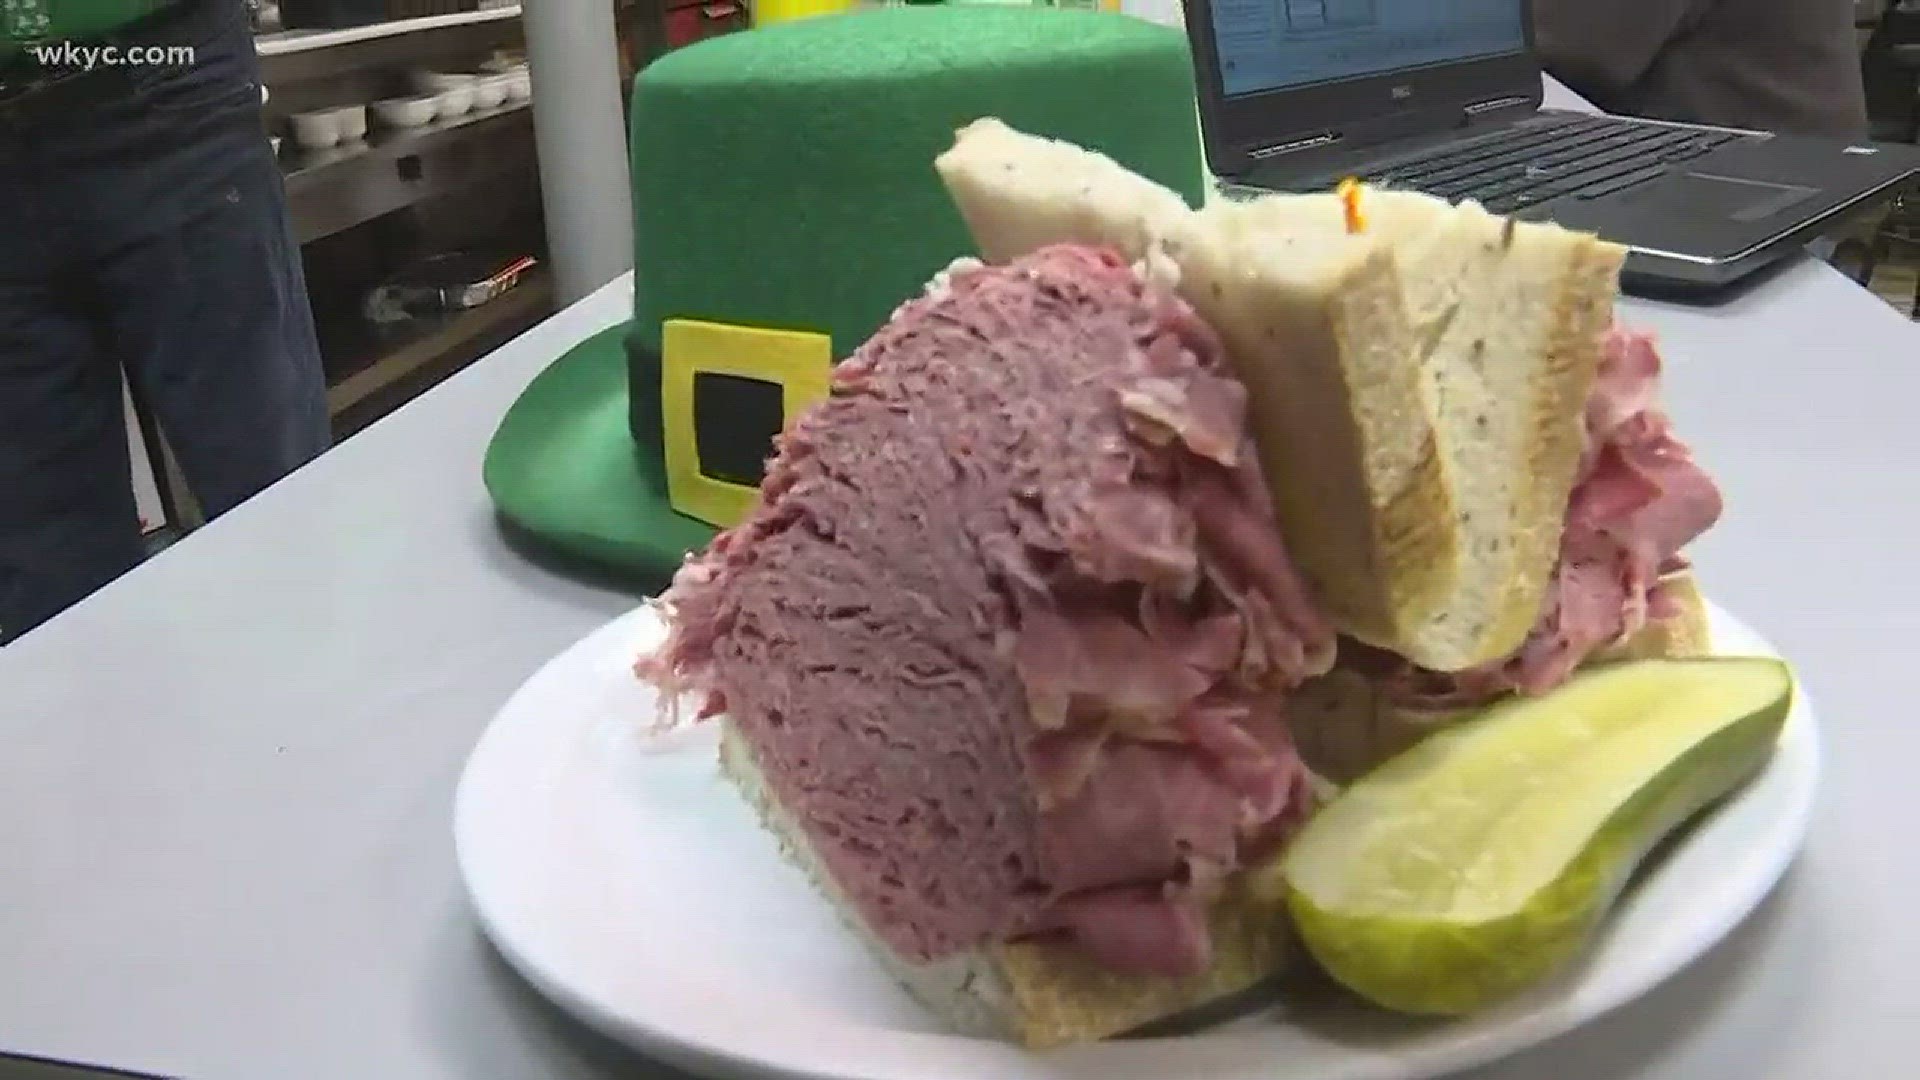 March 16, 2018: Hungry? Our crews are excited for St. Patrick's Day, which is why we're at Danny's Deli in Cleveland.